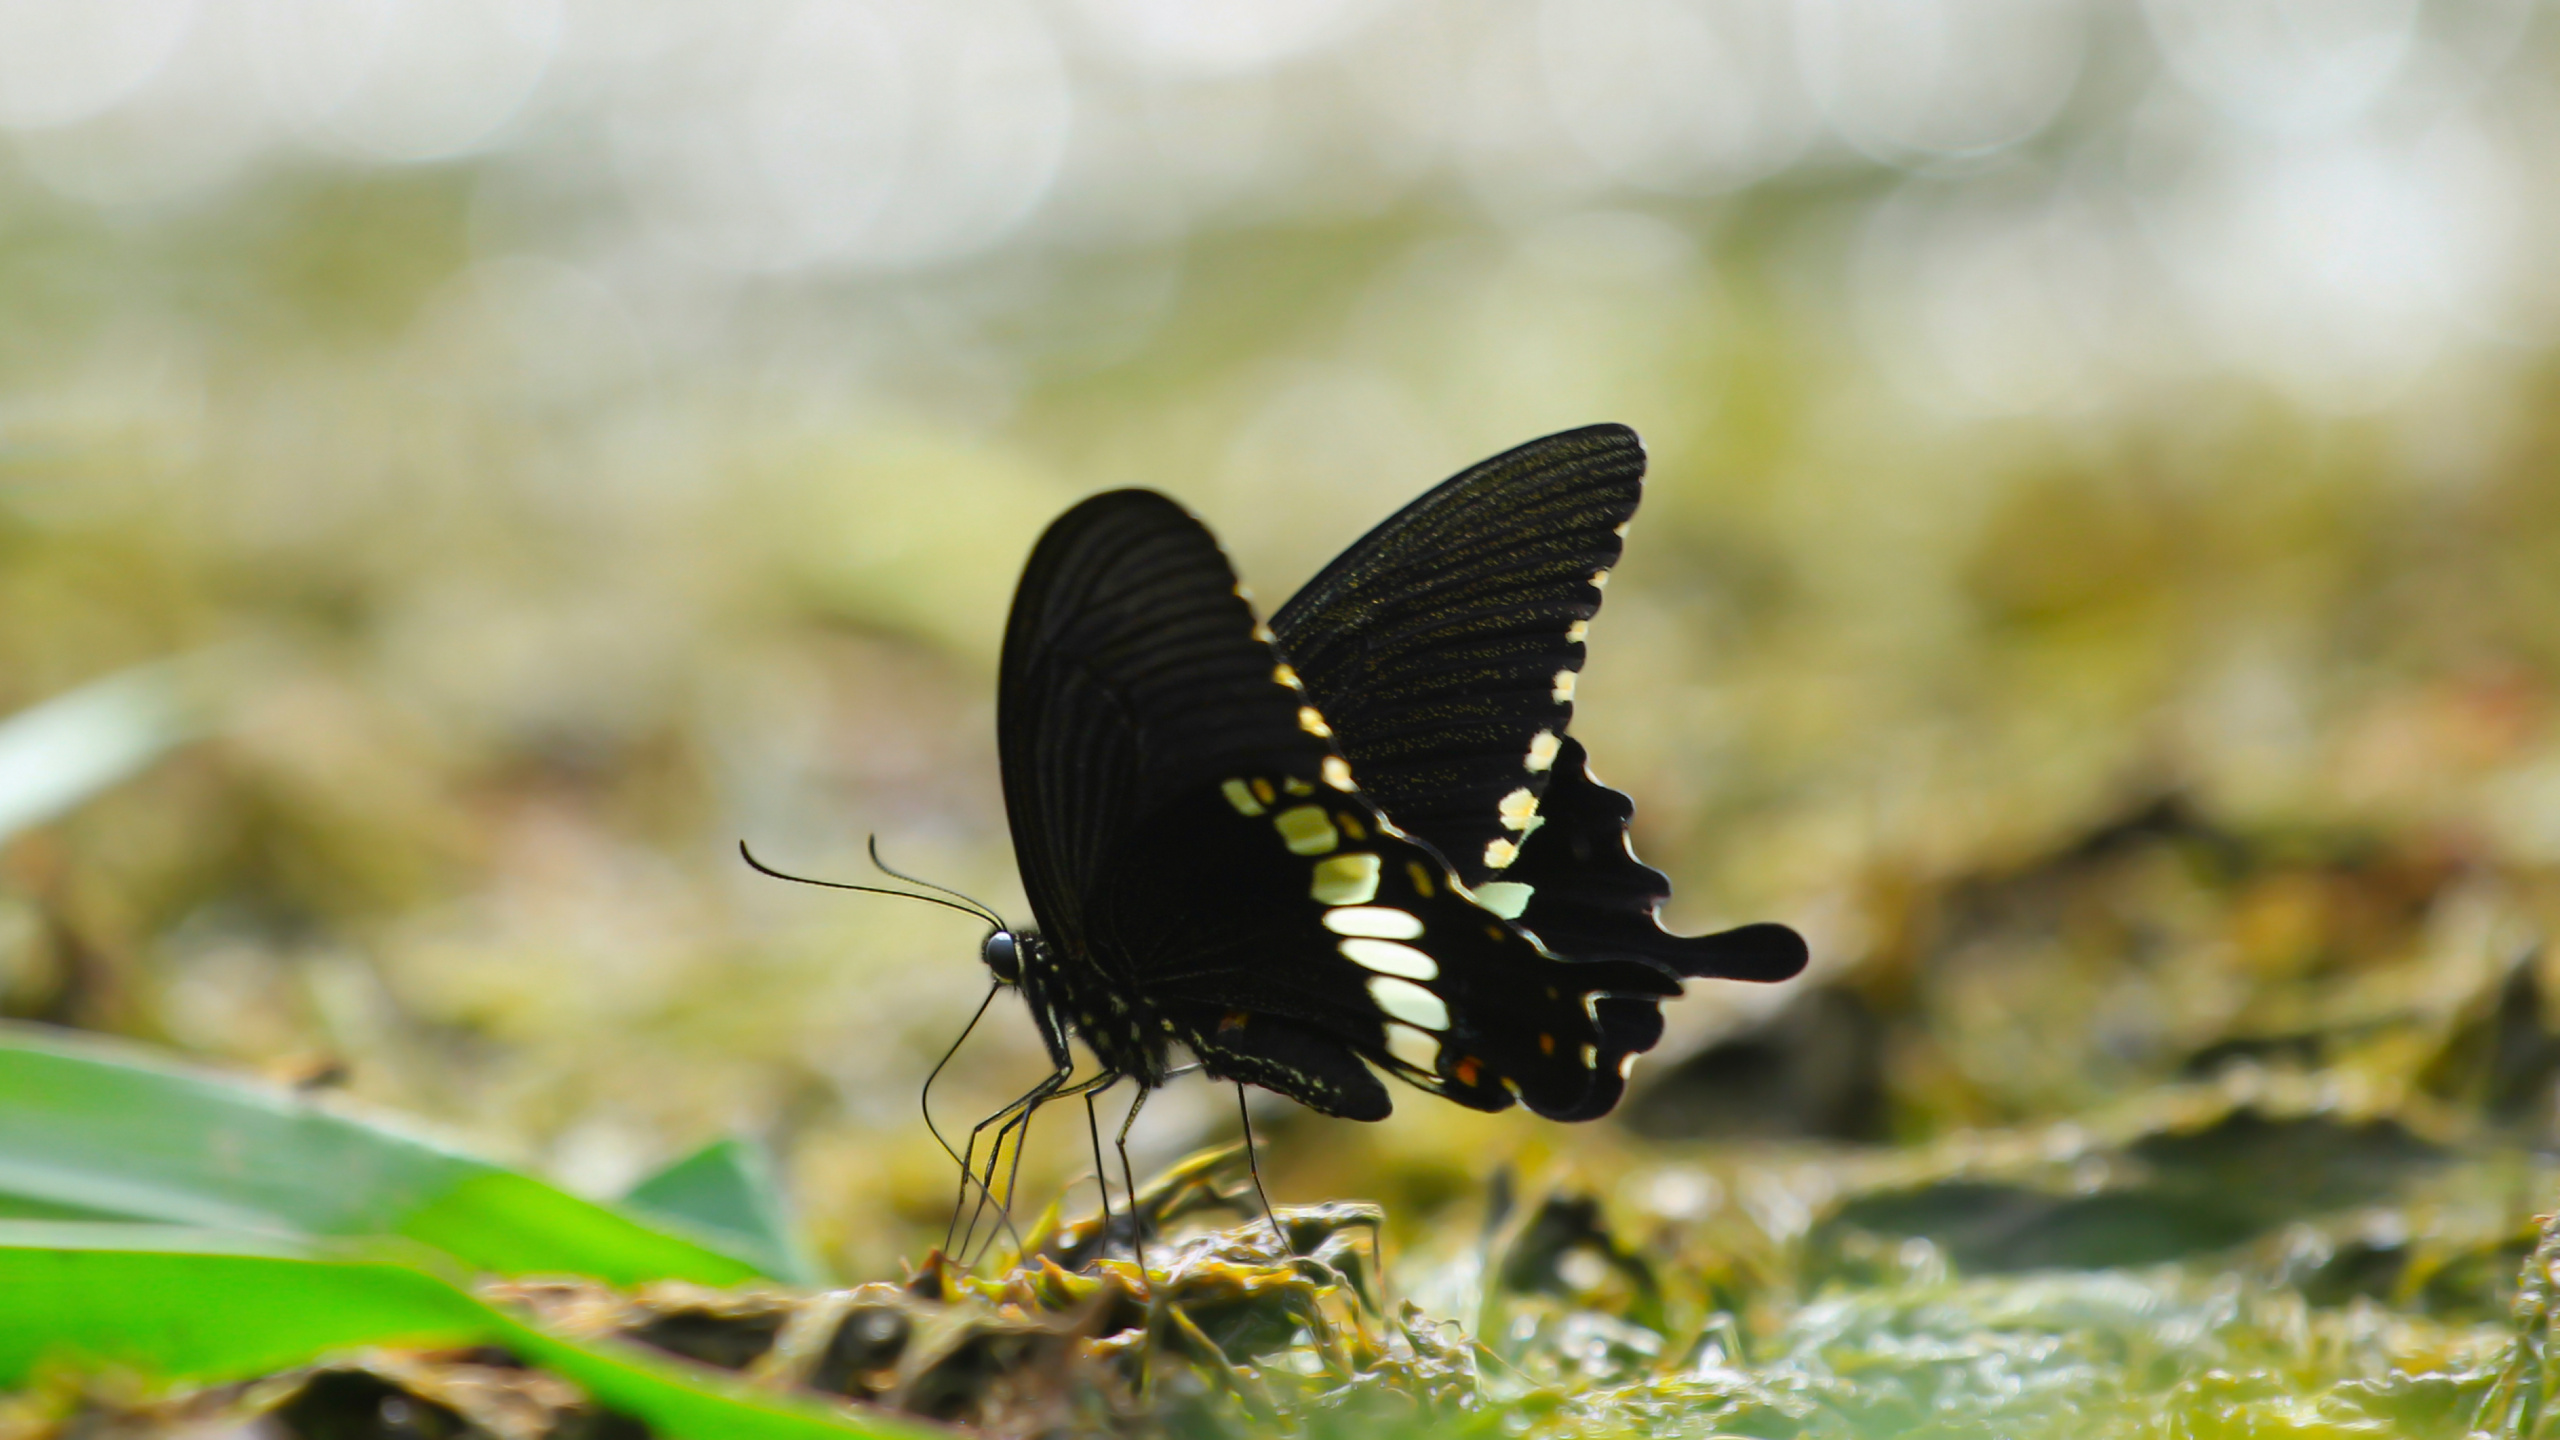 Black and White Butterfly on Green Grass During Daytime. Wallpaper in 2560x1440 Resolution